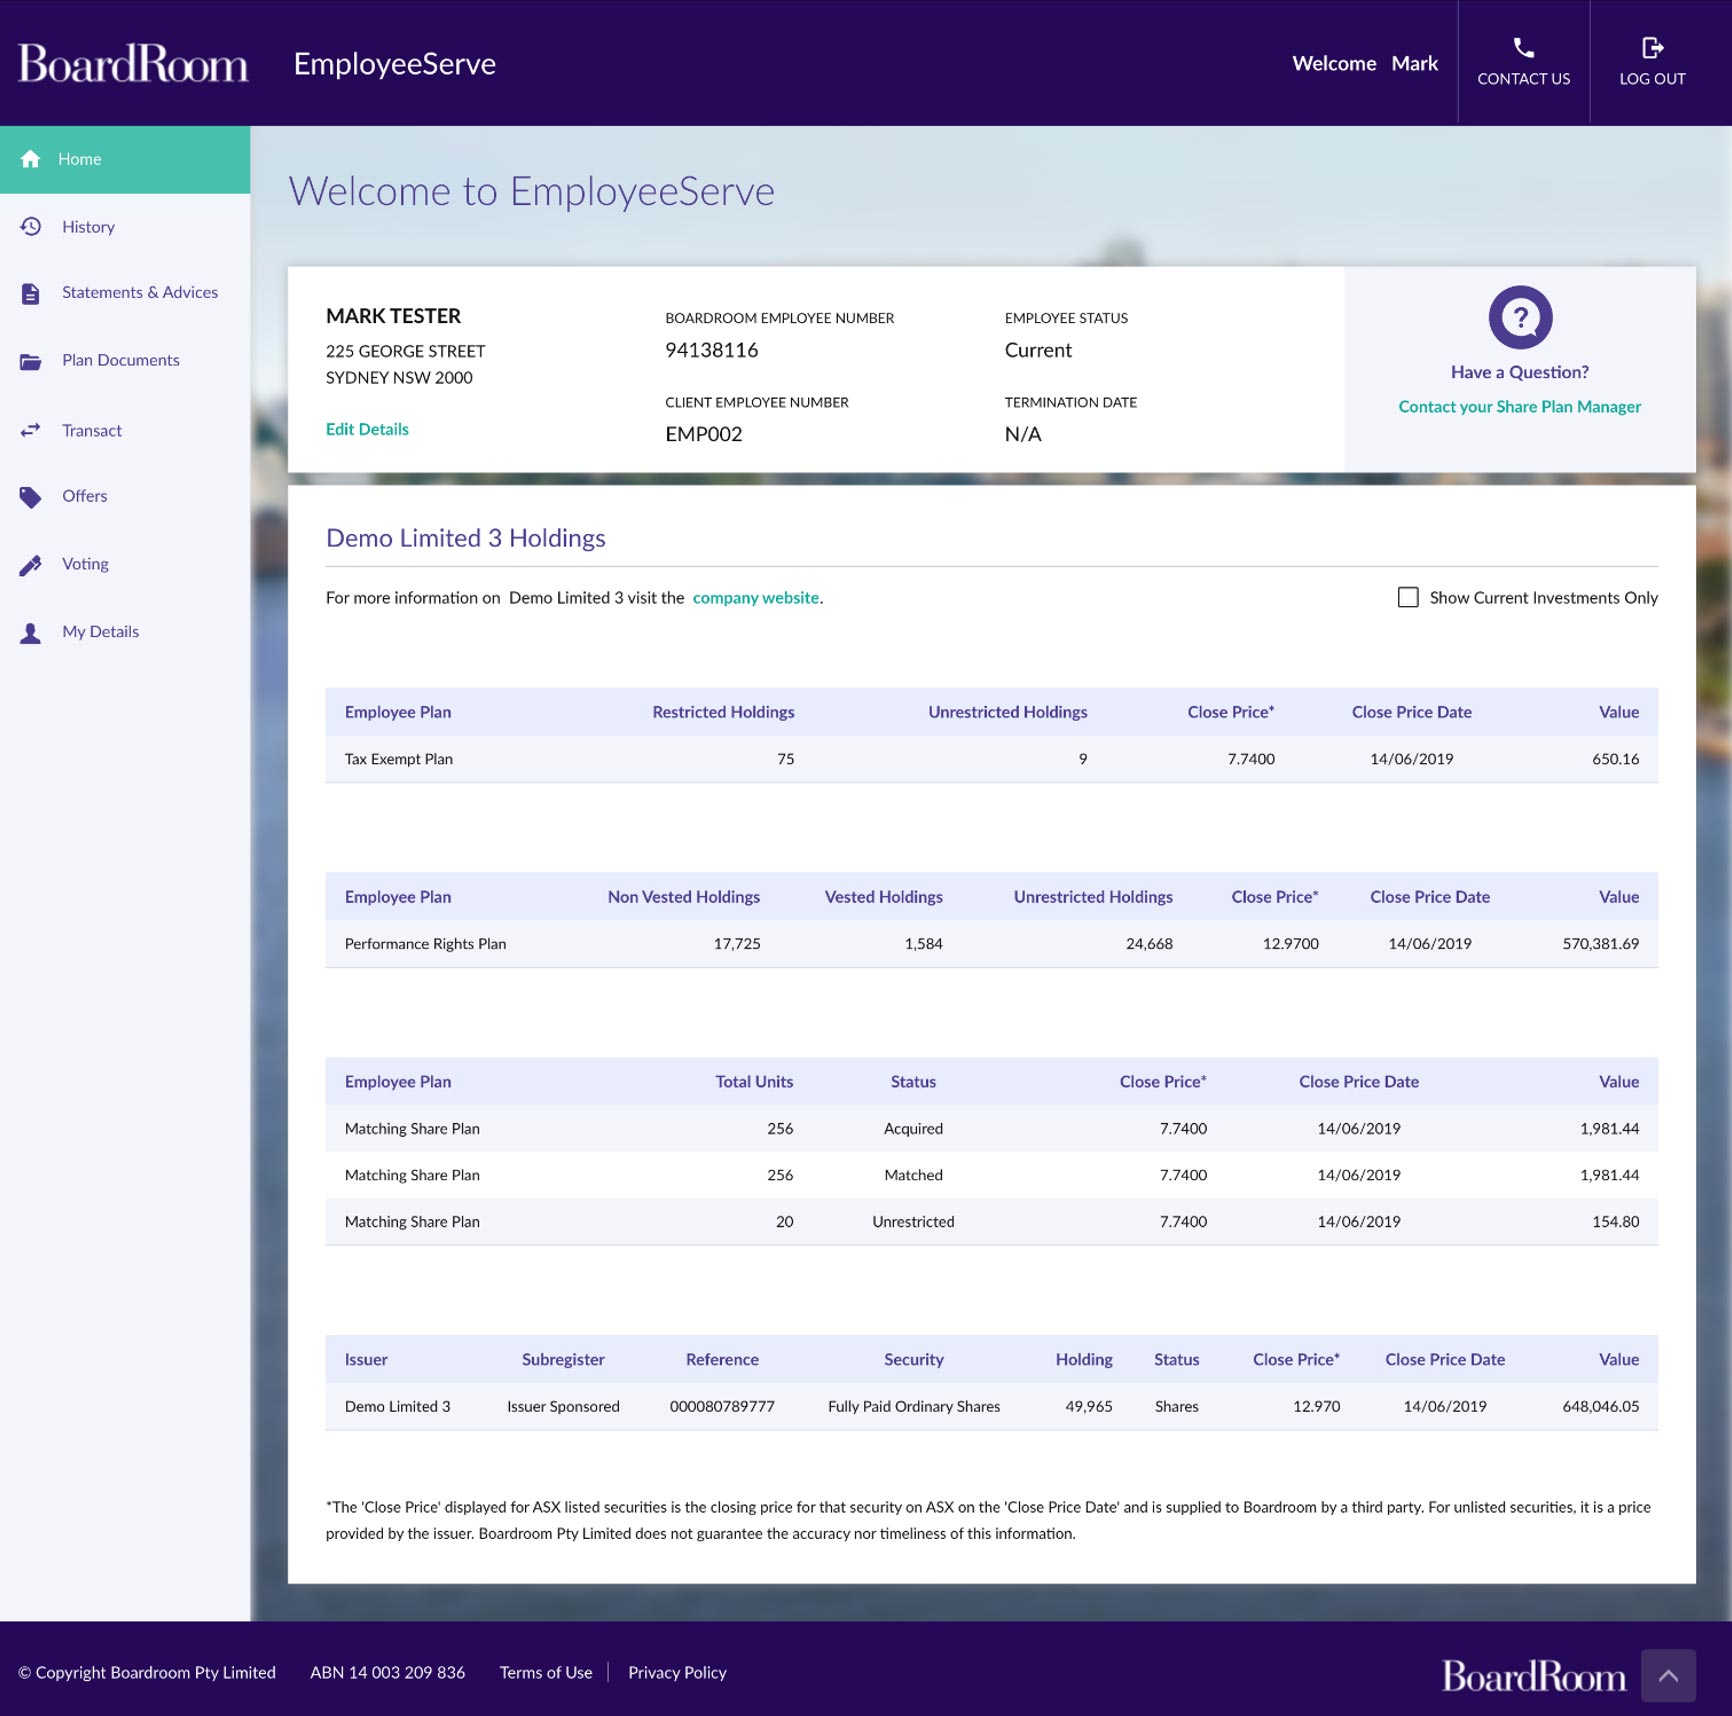 The BoardRoom EmployeeServe interface